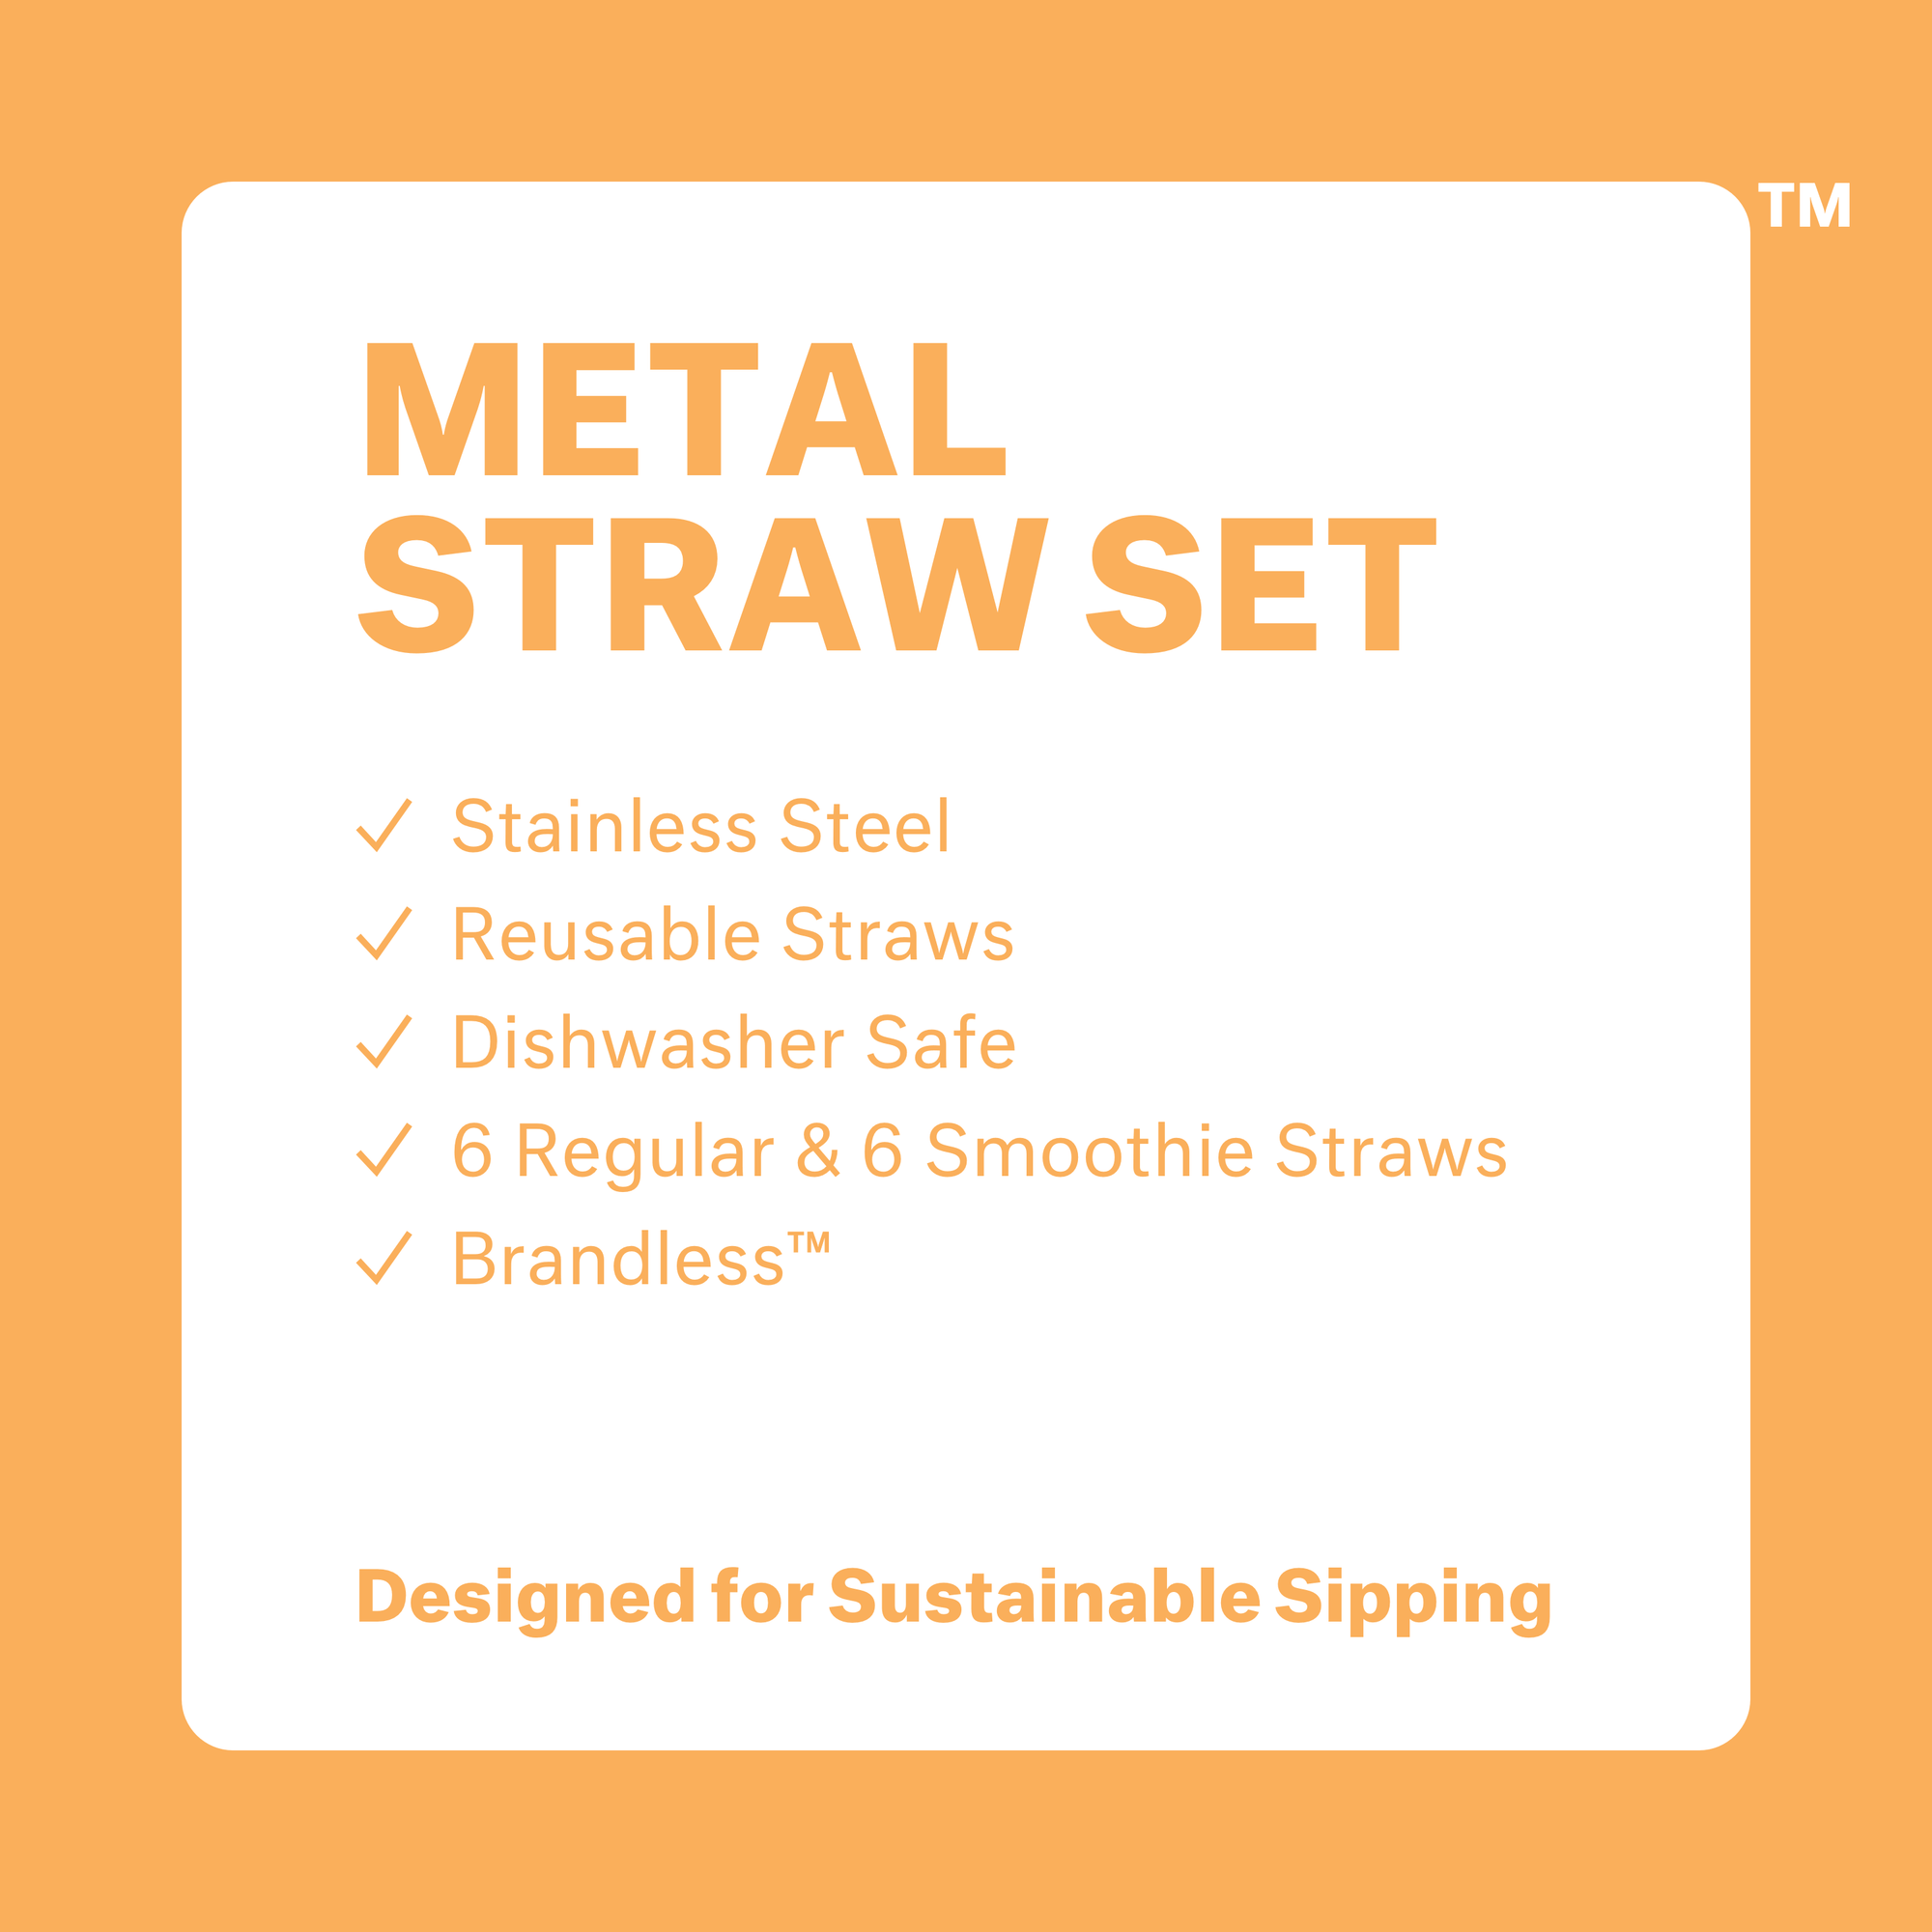 Metal straw set and brush cleaner